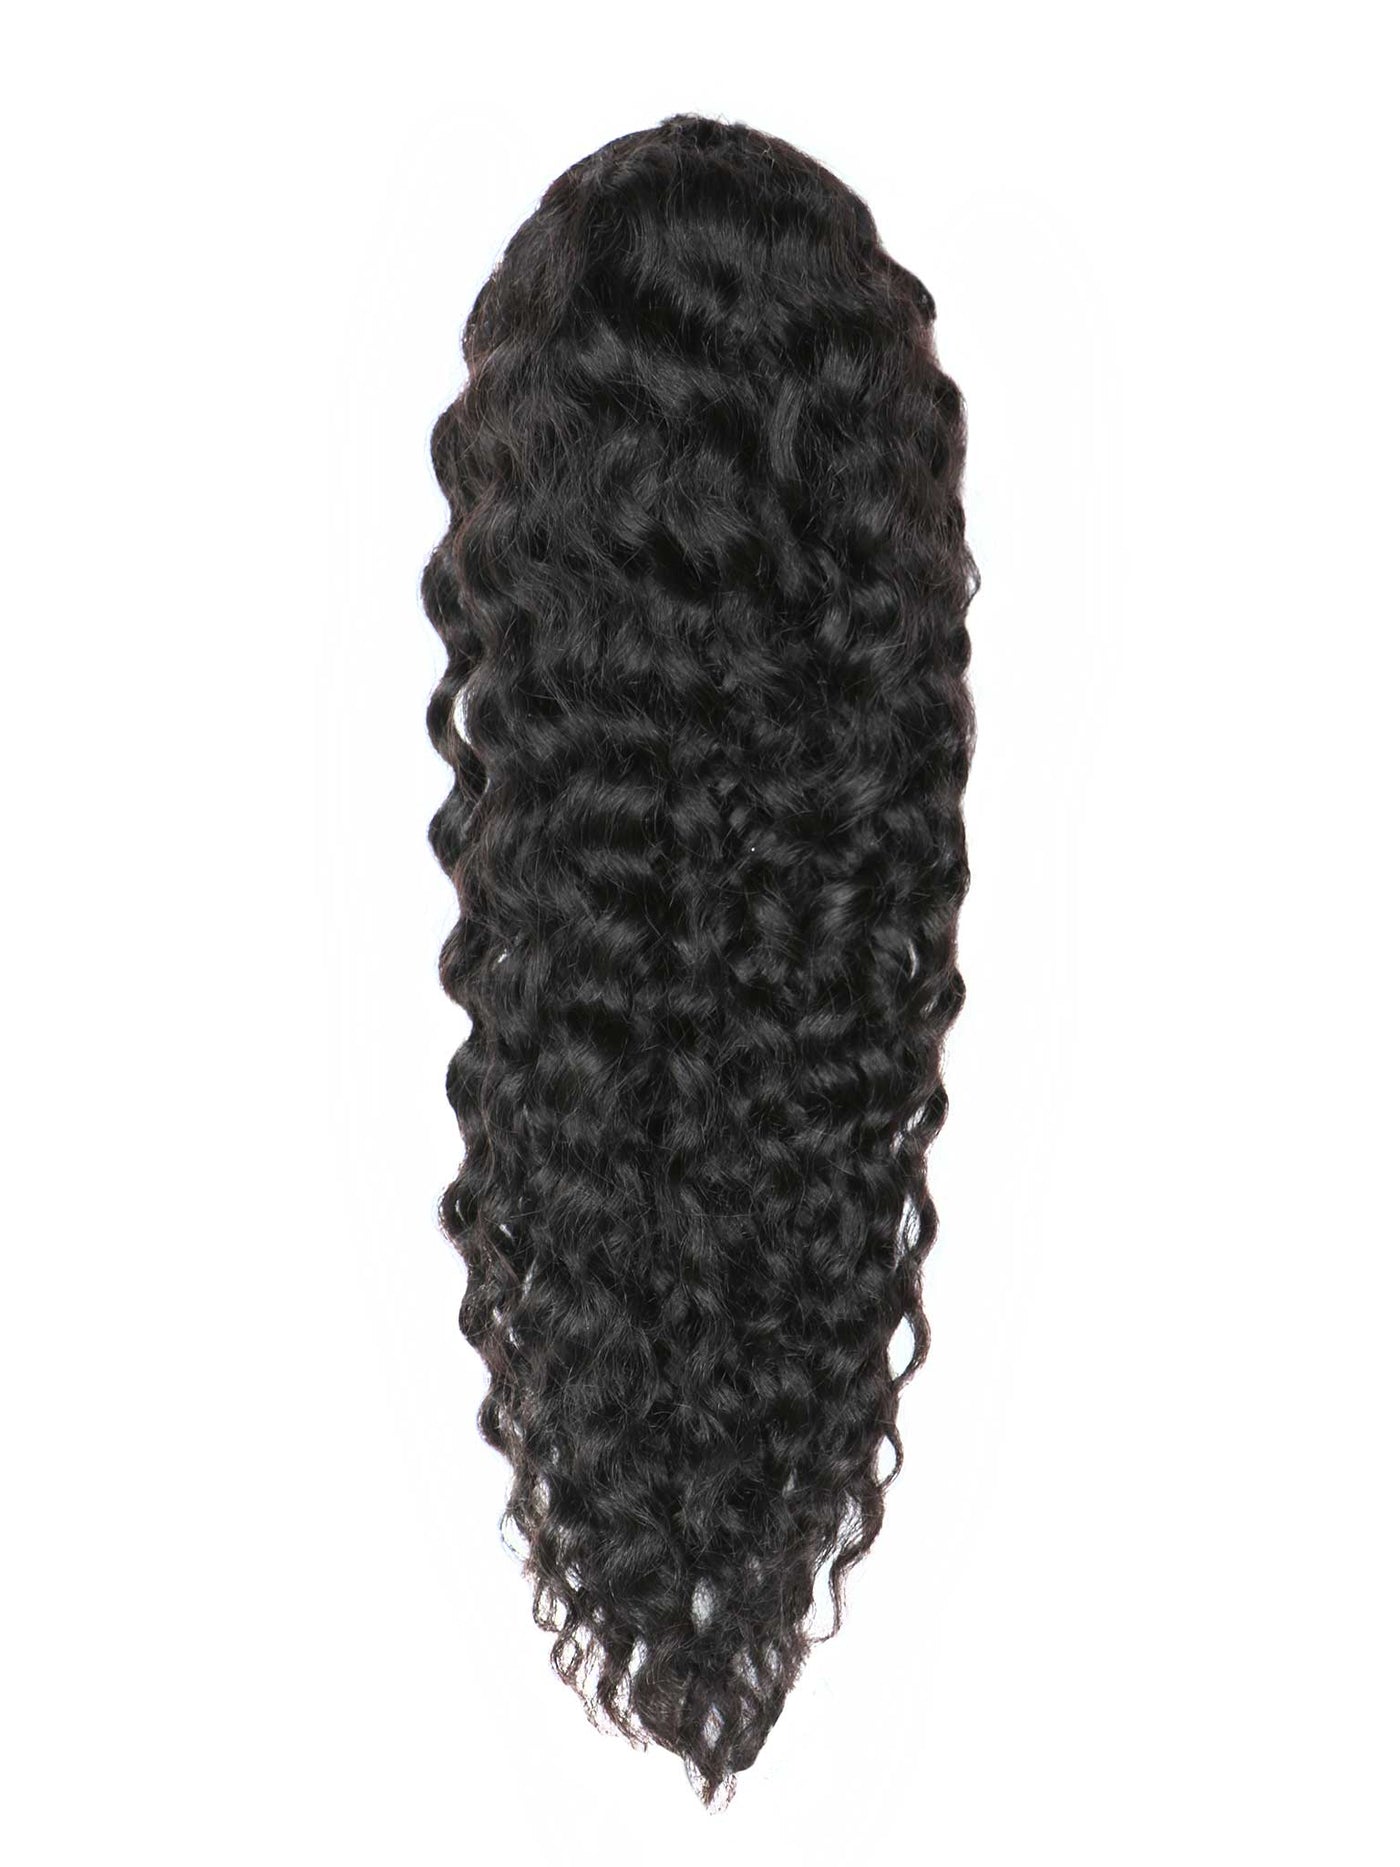 Indique Remix Curly Ponytail Hair Extensions Hair Piece